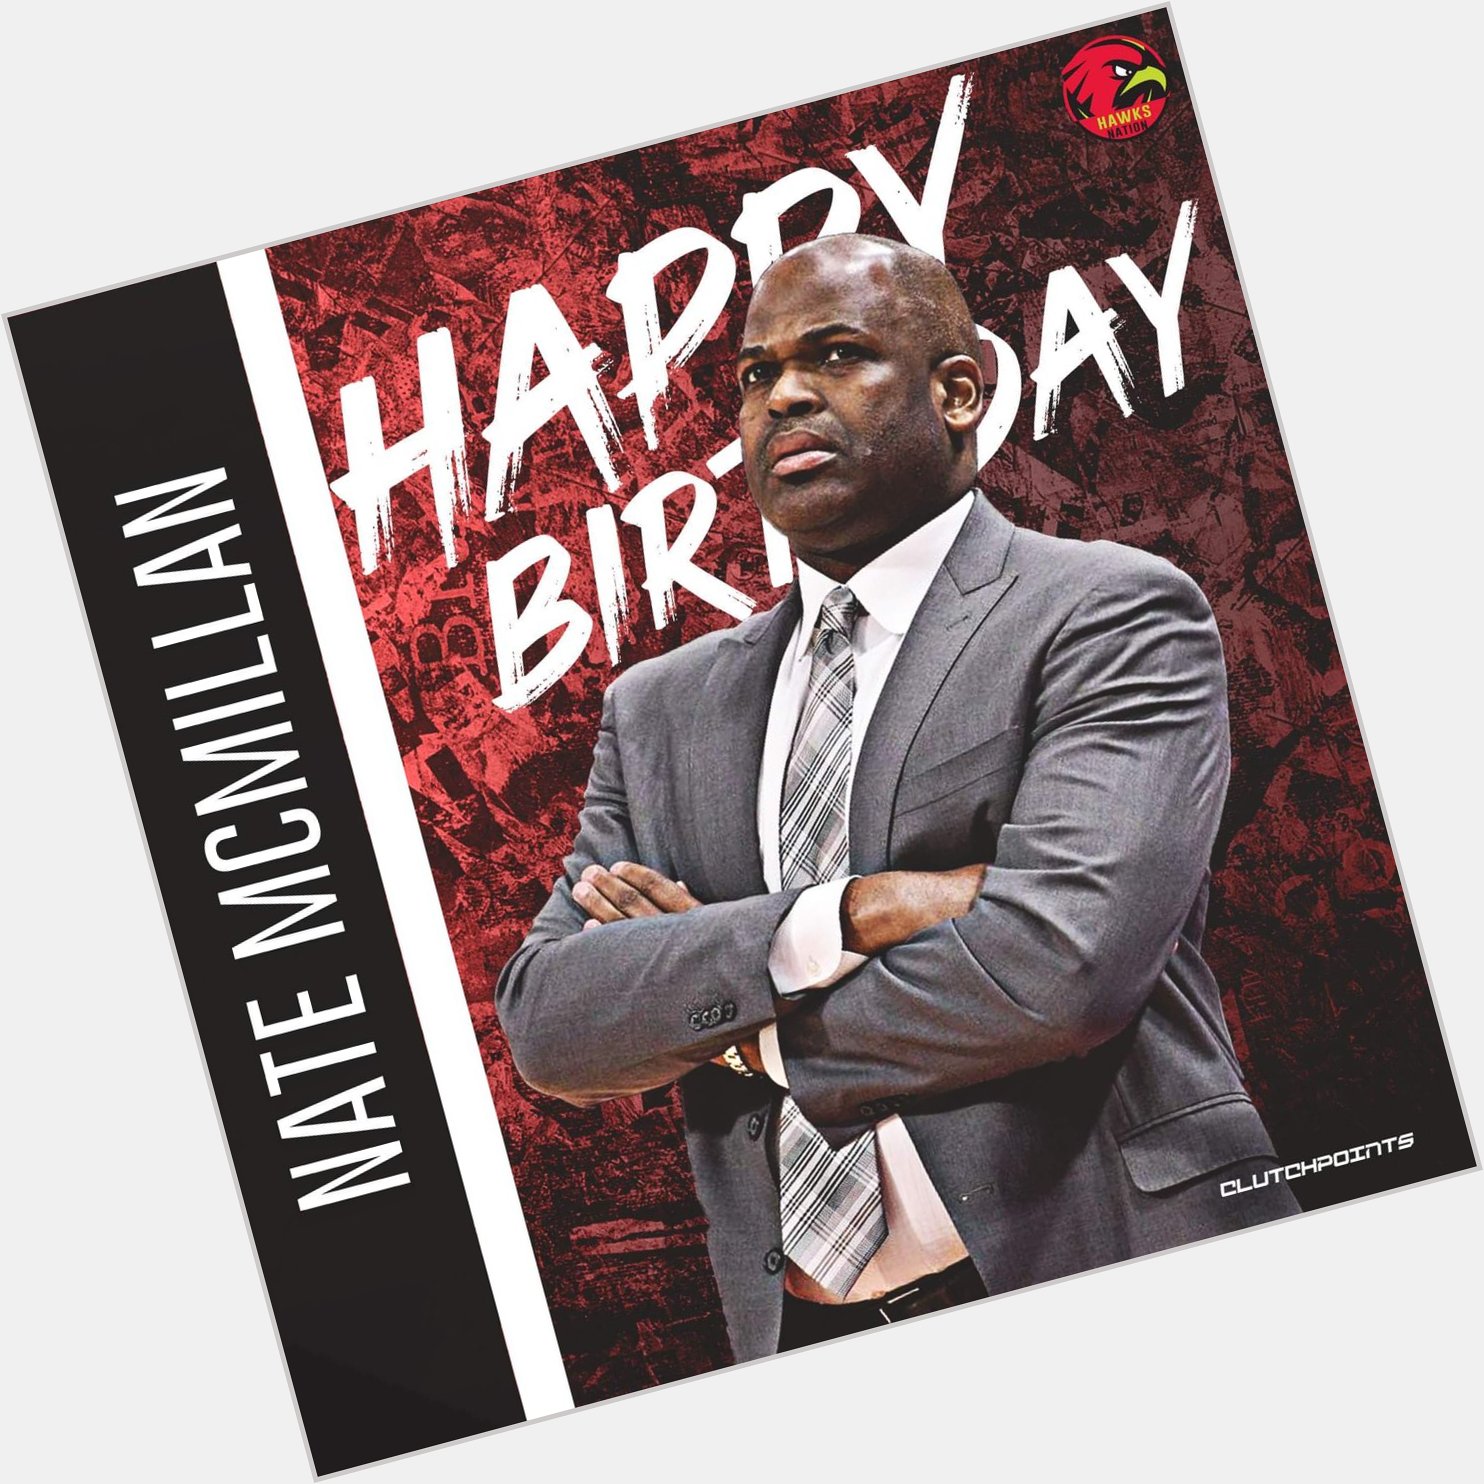 Join Hawks Nation in greeting Coach Nate McMillan a happy 57th birthday!  